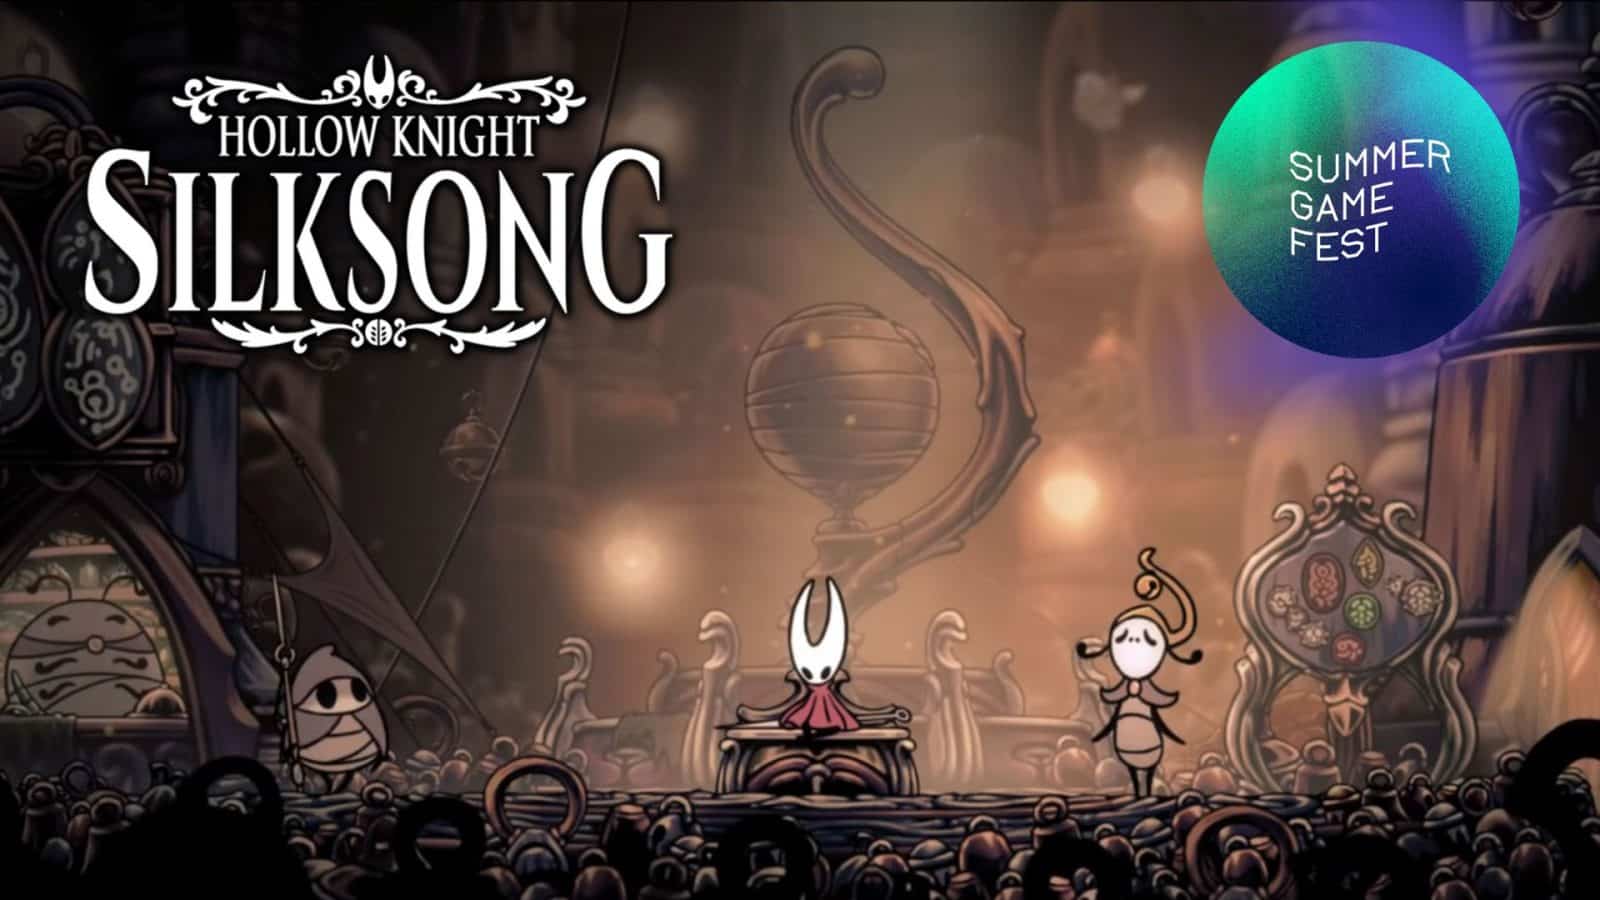 hornet stage performance in hollow knight silksong